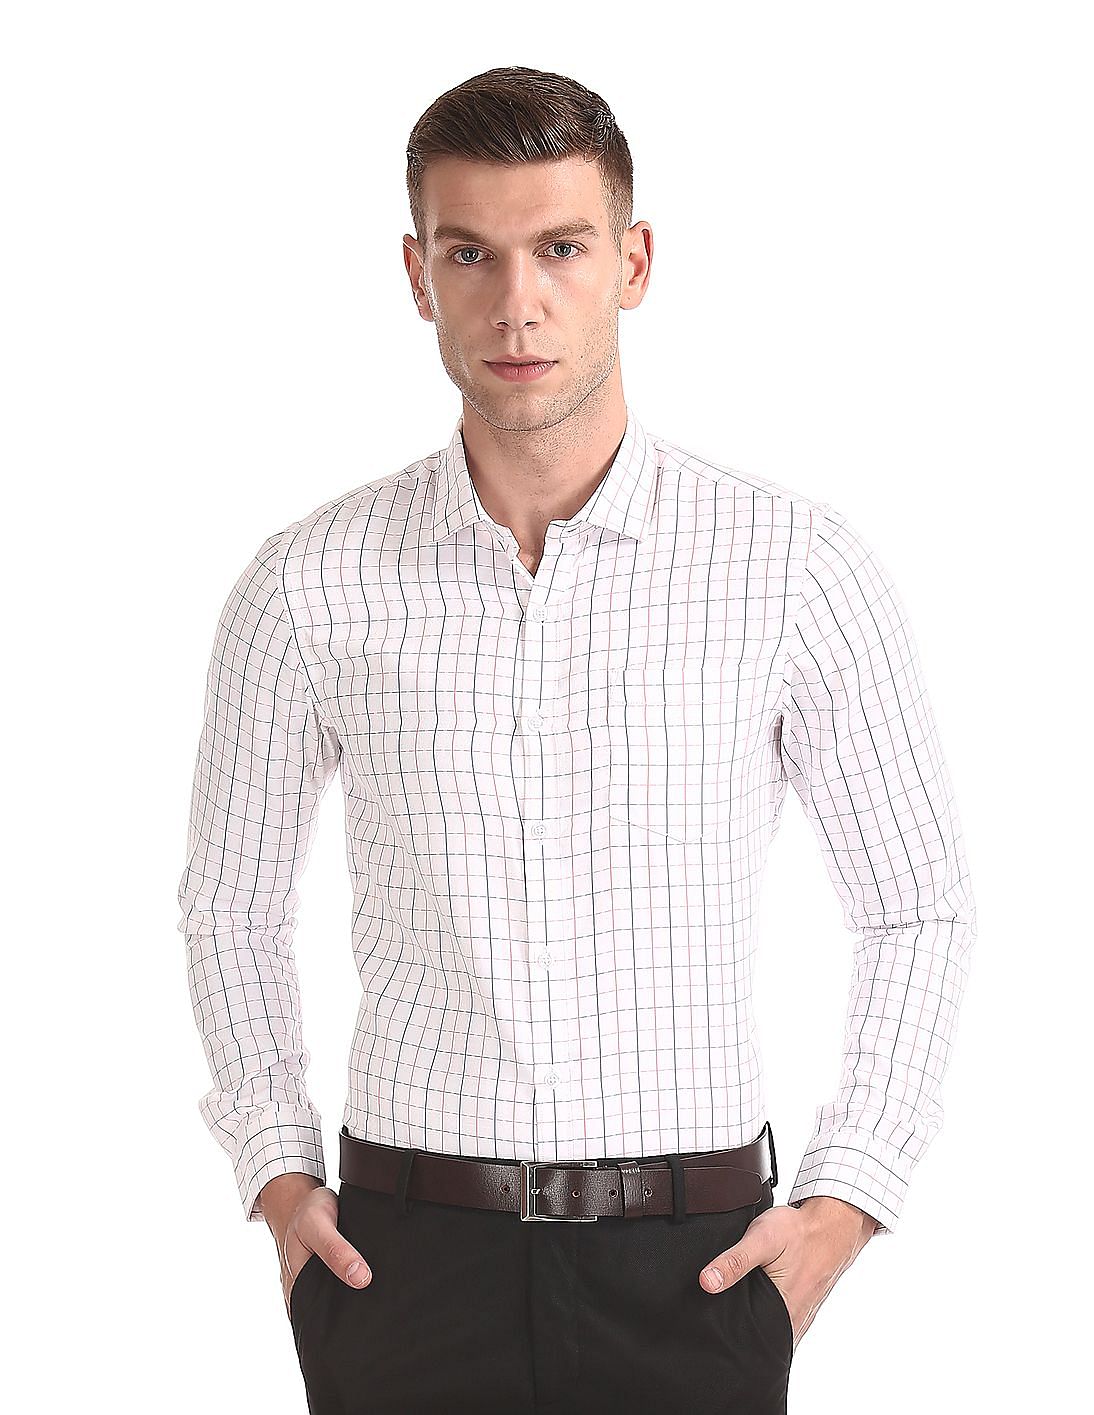 Buy Excalibur Mitered Cuff Long Sleeve Shirt - Pack Of 2 - NNNOW.com